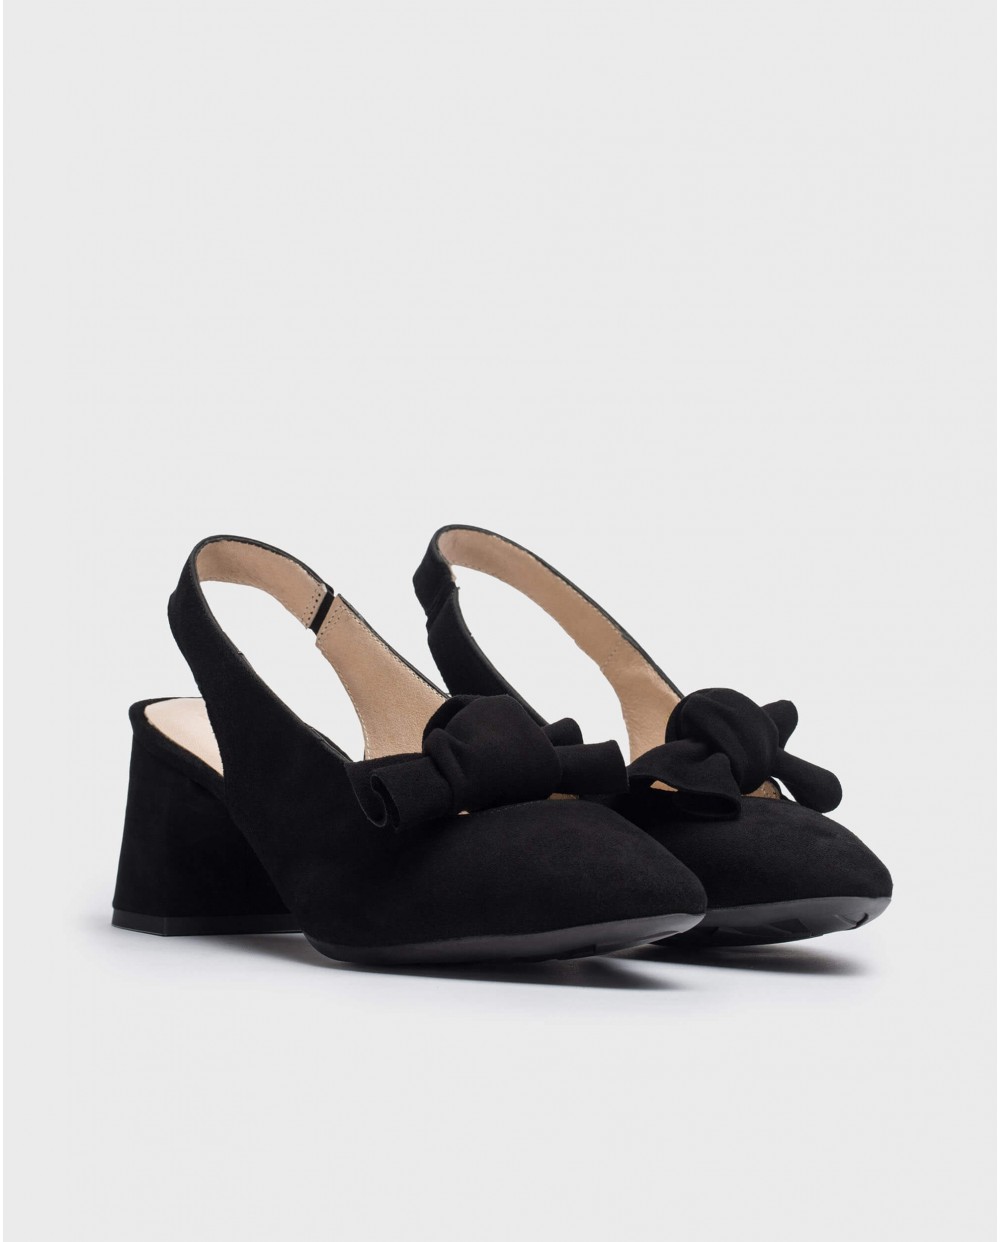 Wonders-Outlet-Zapato Over negro